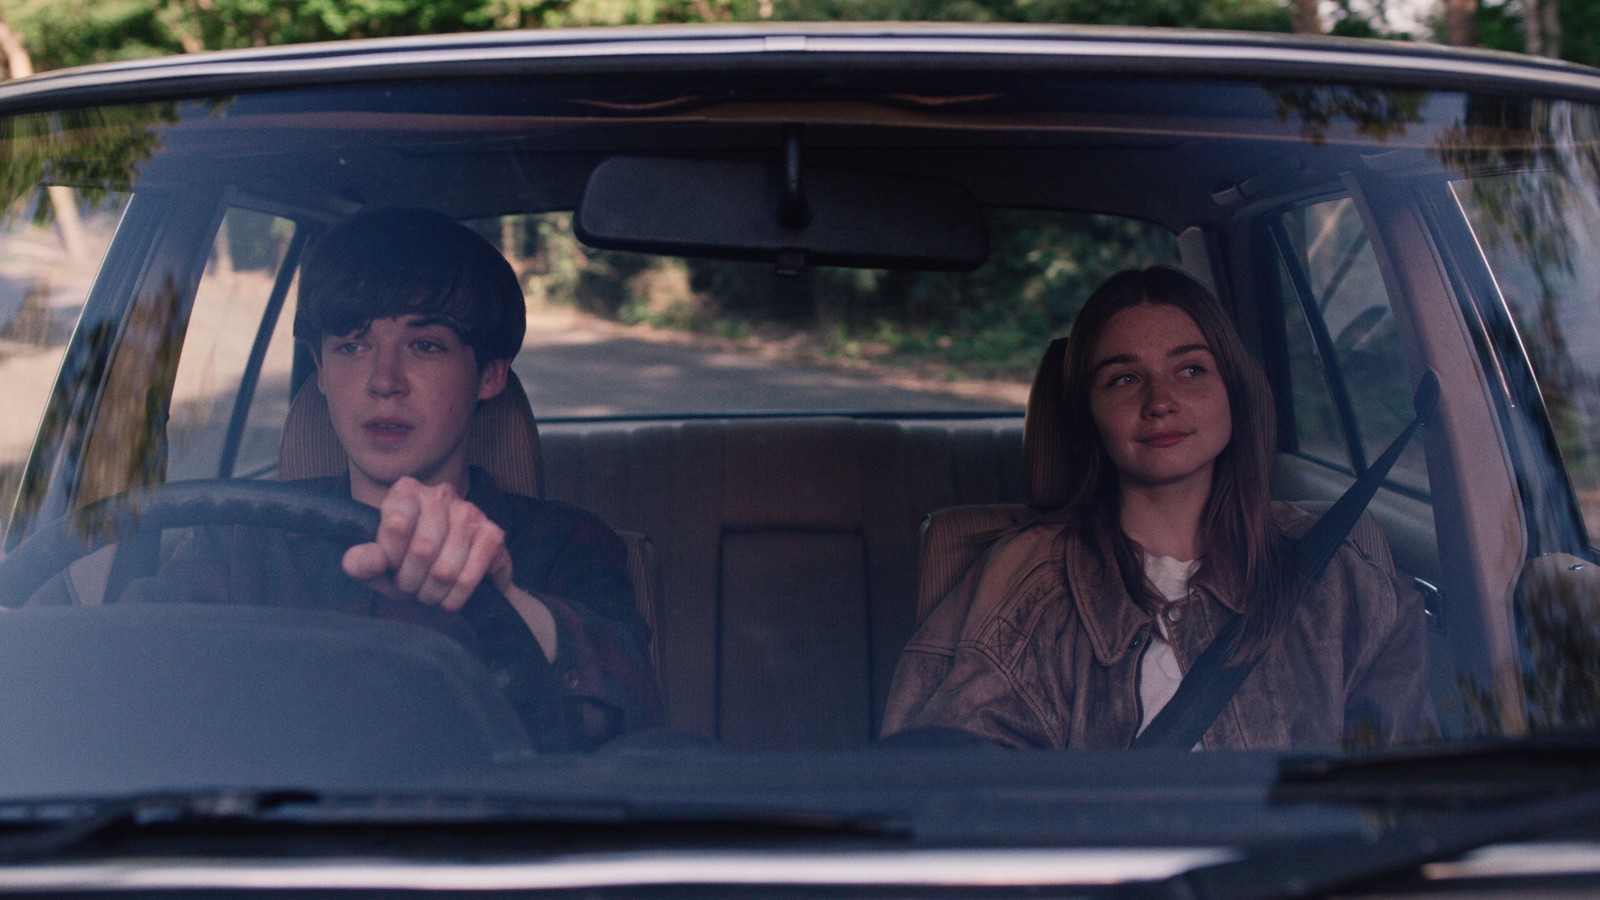 Netflix's 'The End of the F***ing World' Is Pitch-Black Perfection: Review  - The Atlantic